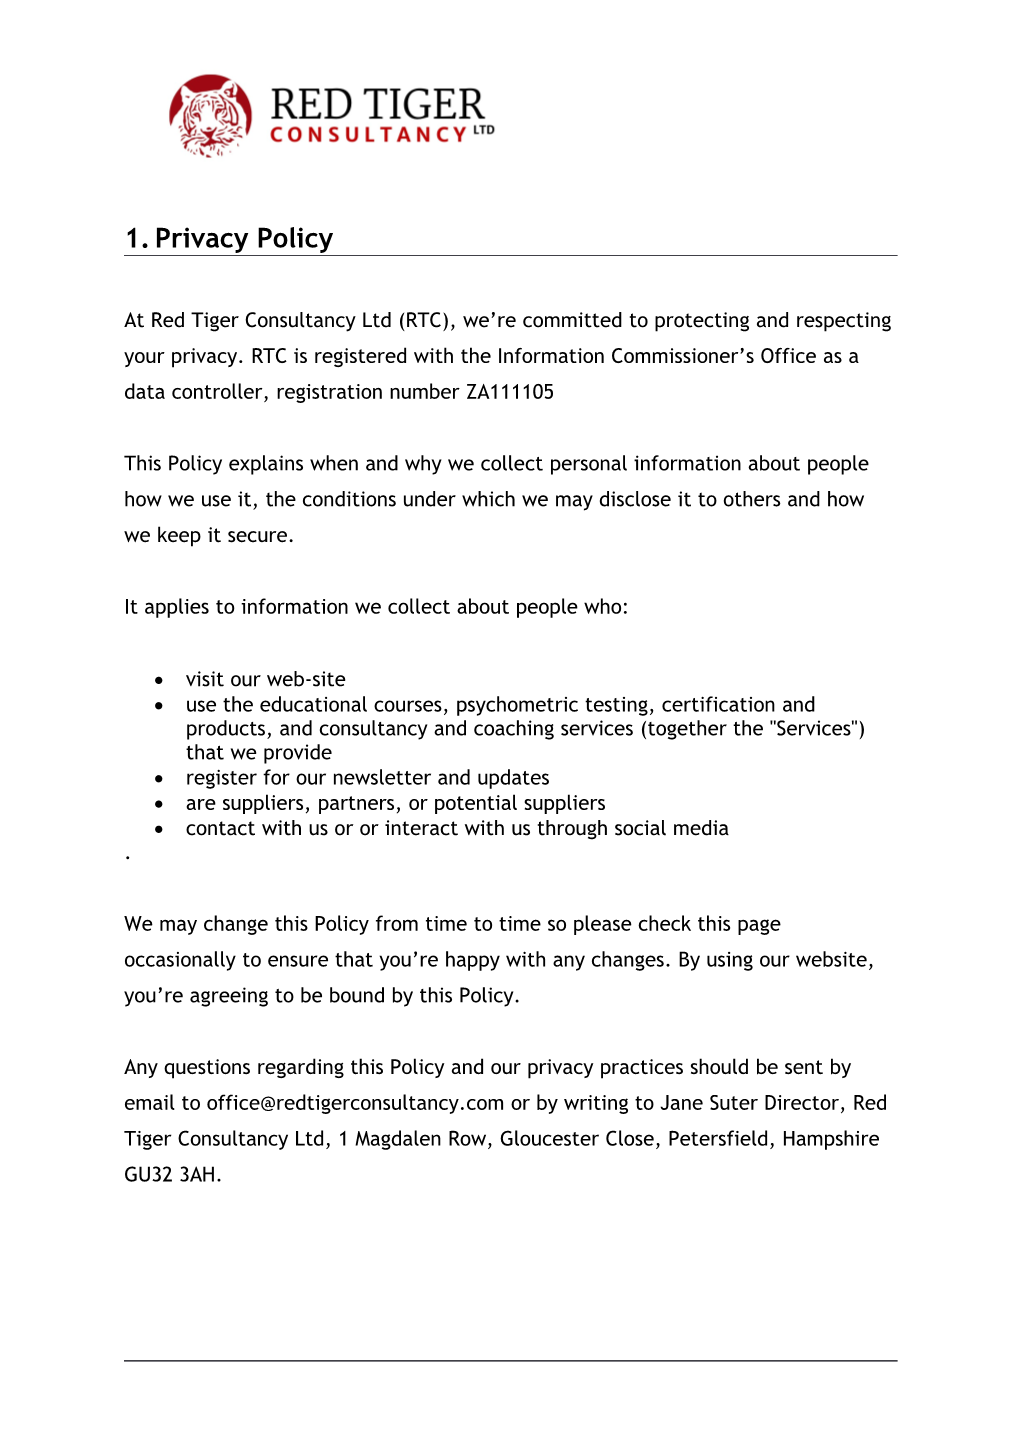 Privacy Policy s2